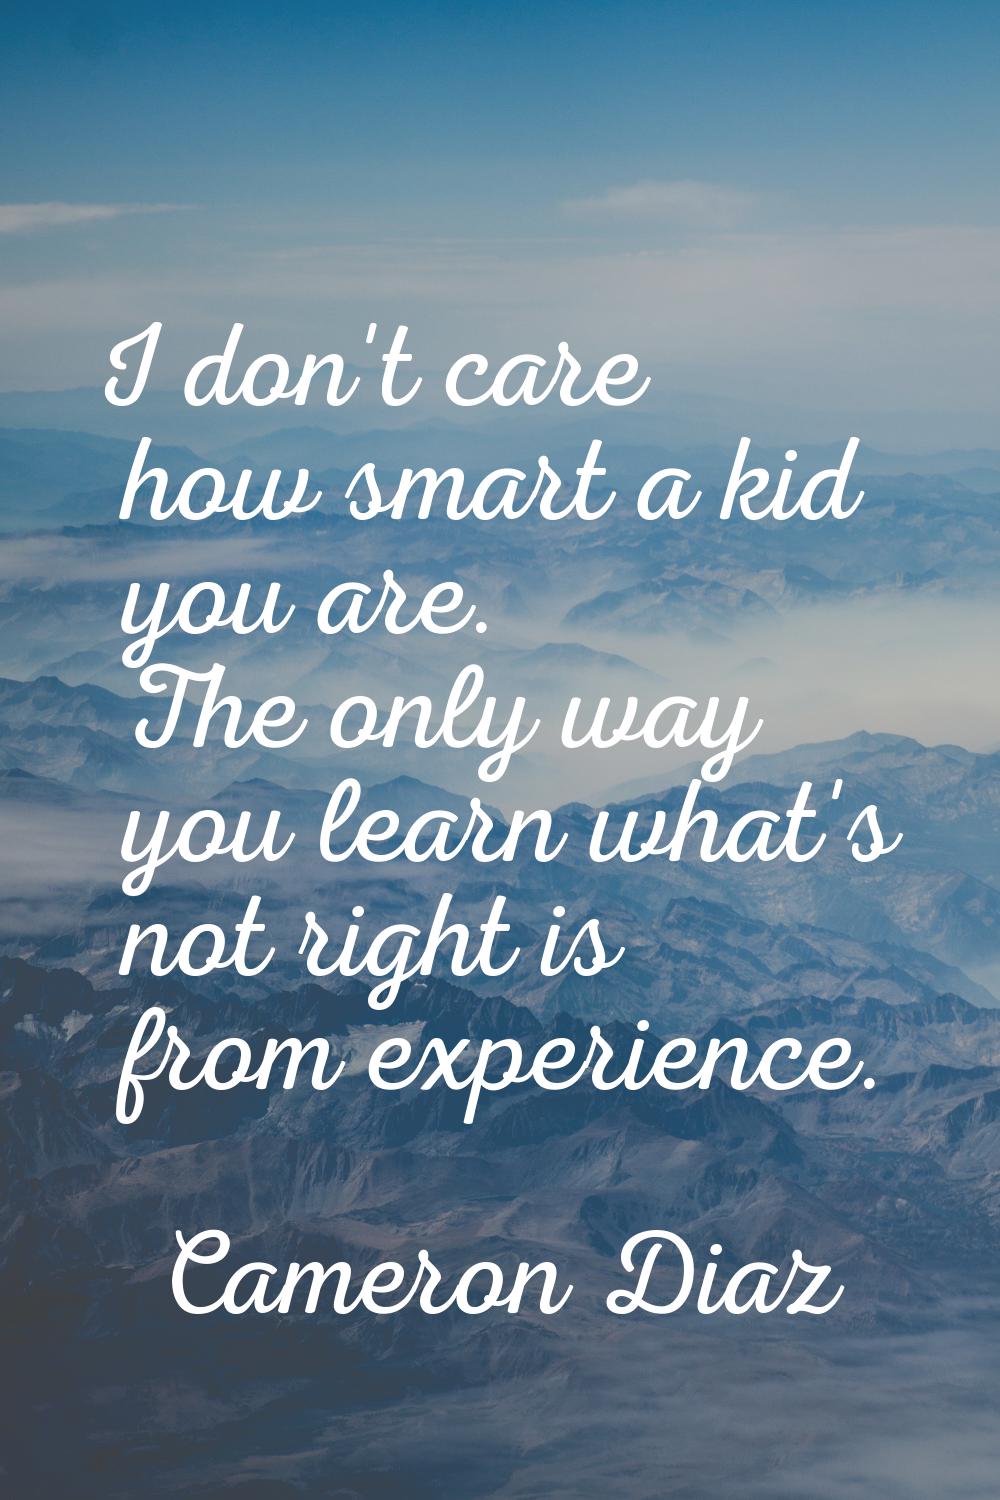 I don't care how smart a kid you are. The only way you learn what's not right is from experience.